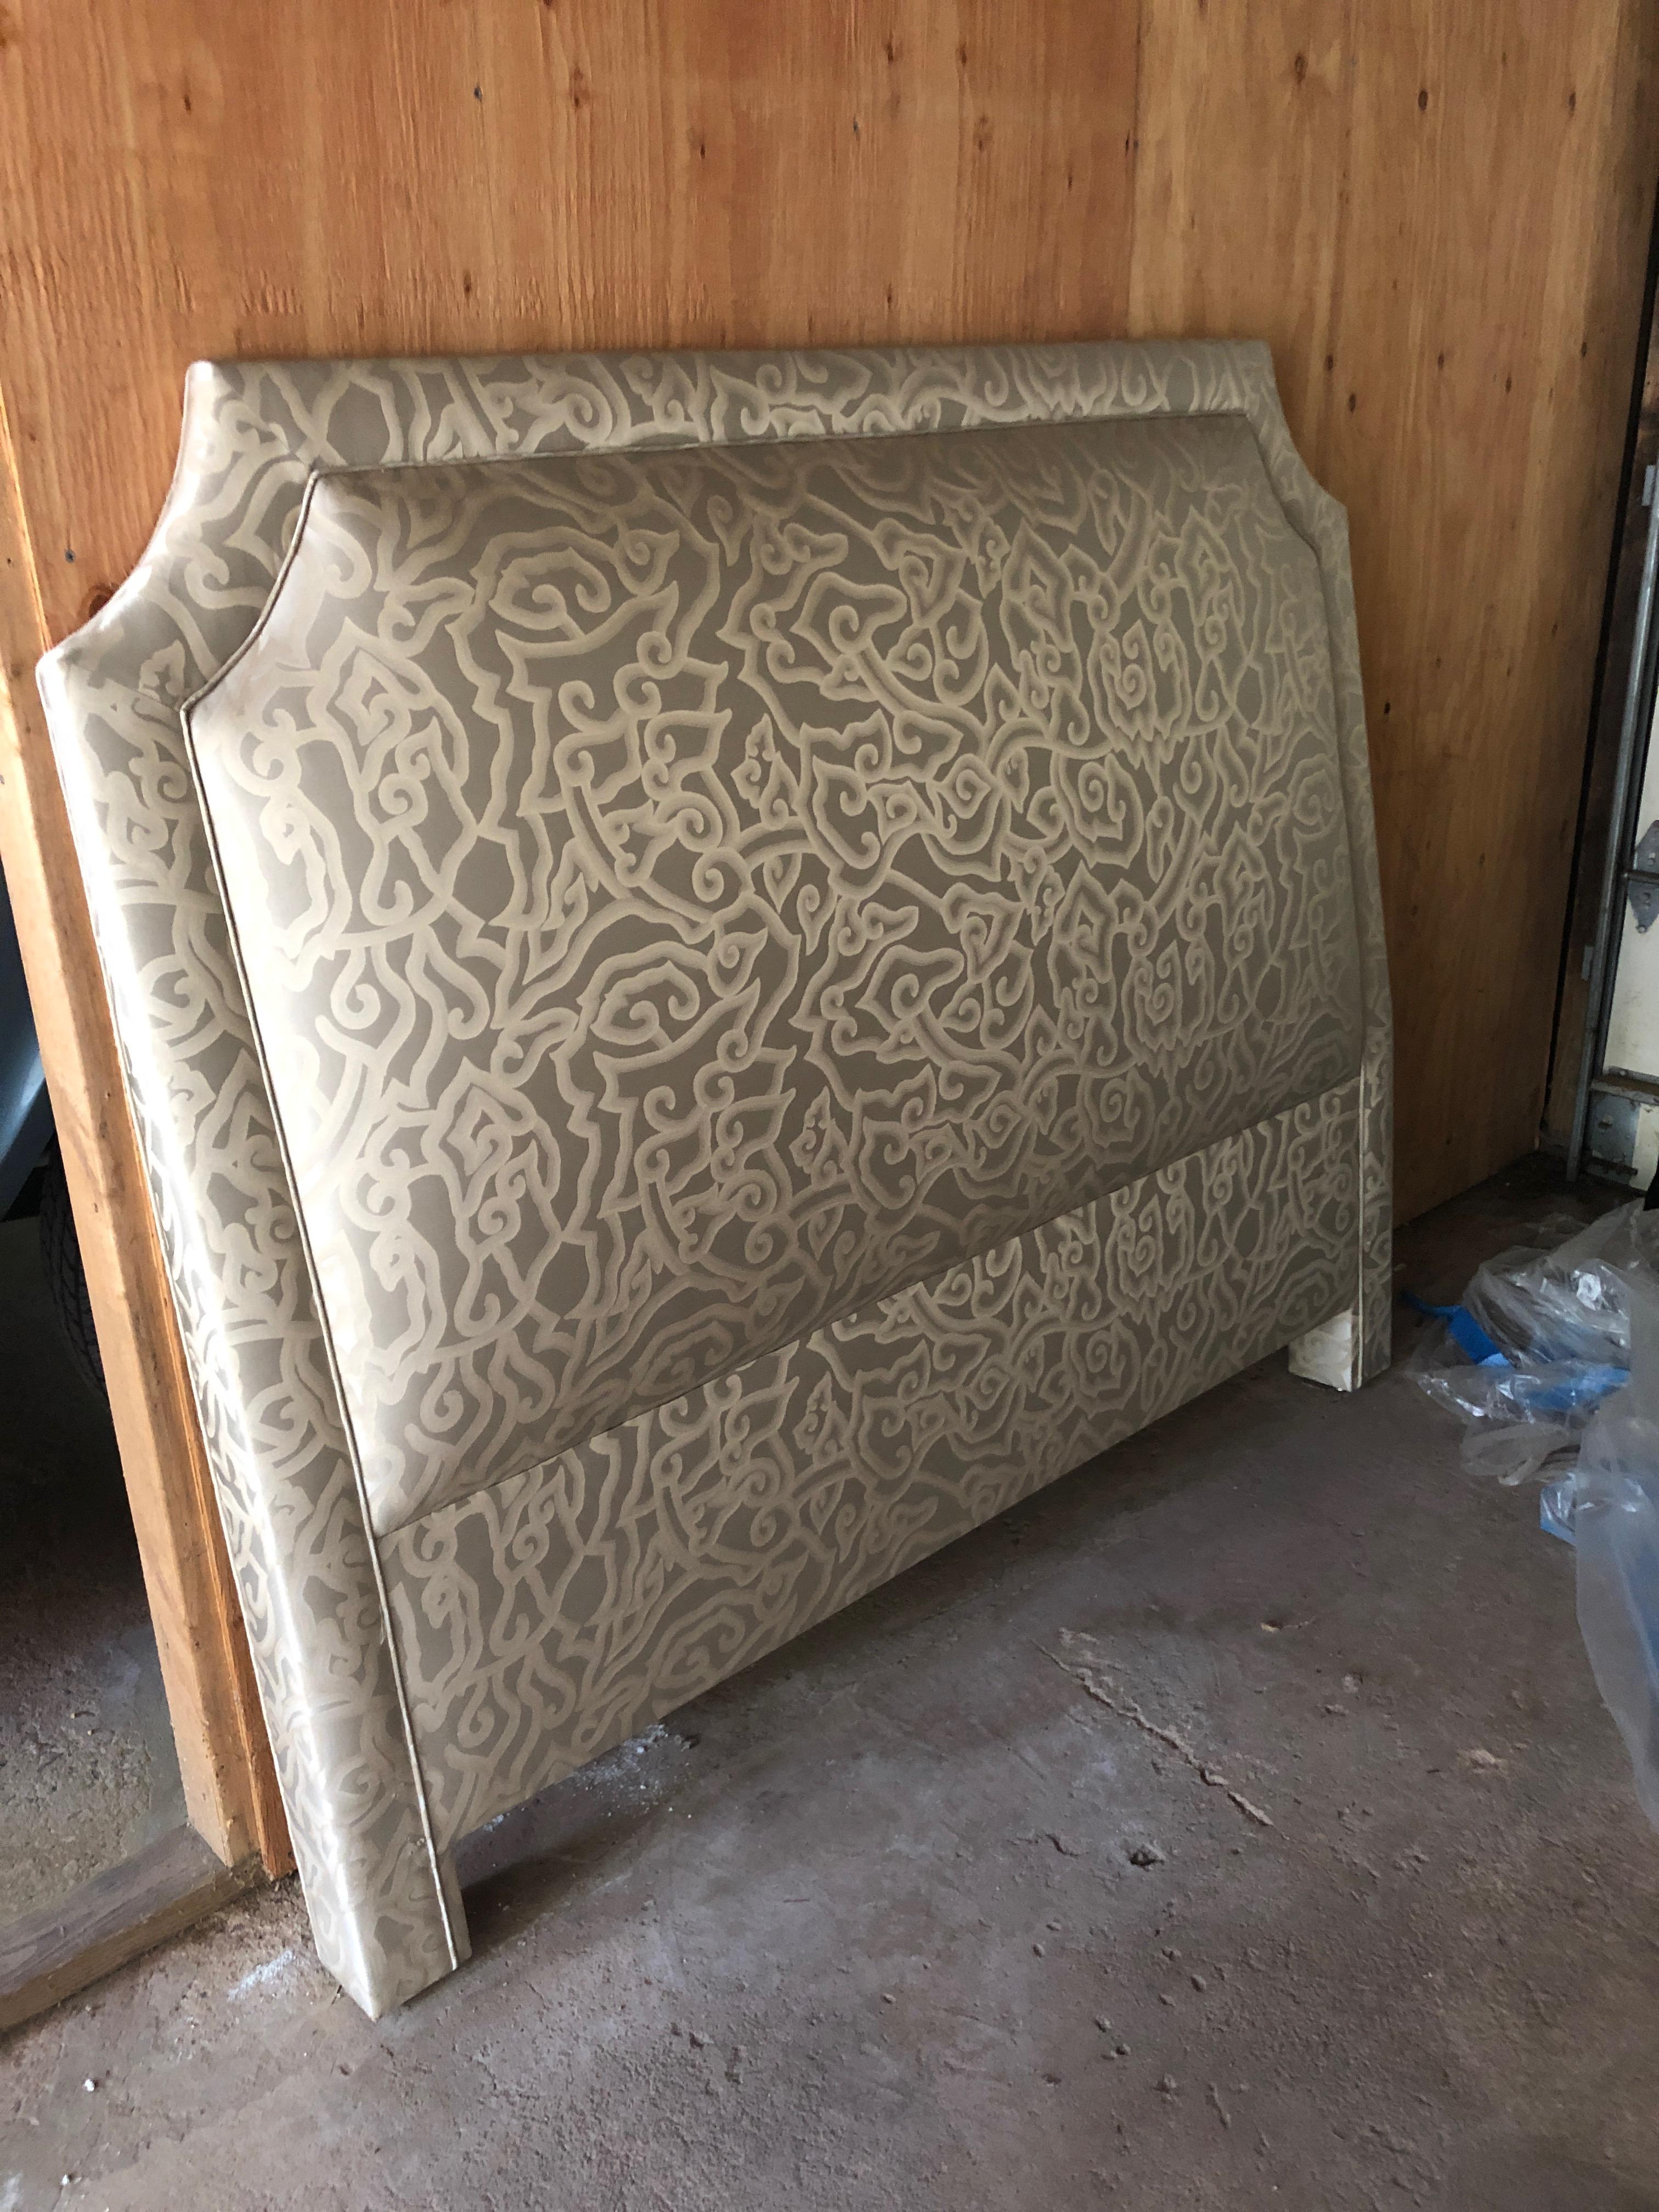 Beautiful satiny upholstered queen size headboard, never used. Material is a neutral swirly satin in taupe and beige.